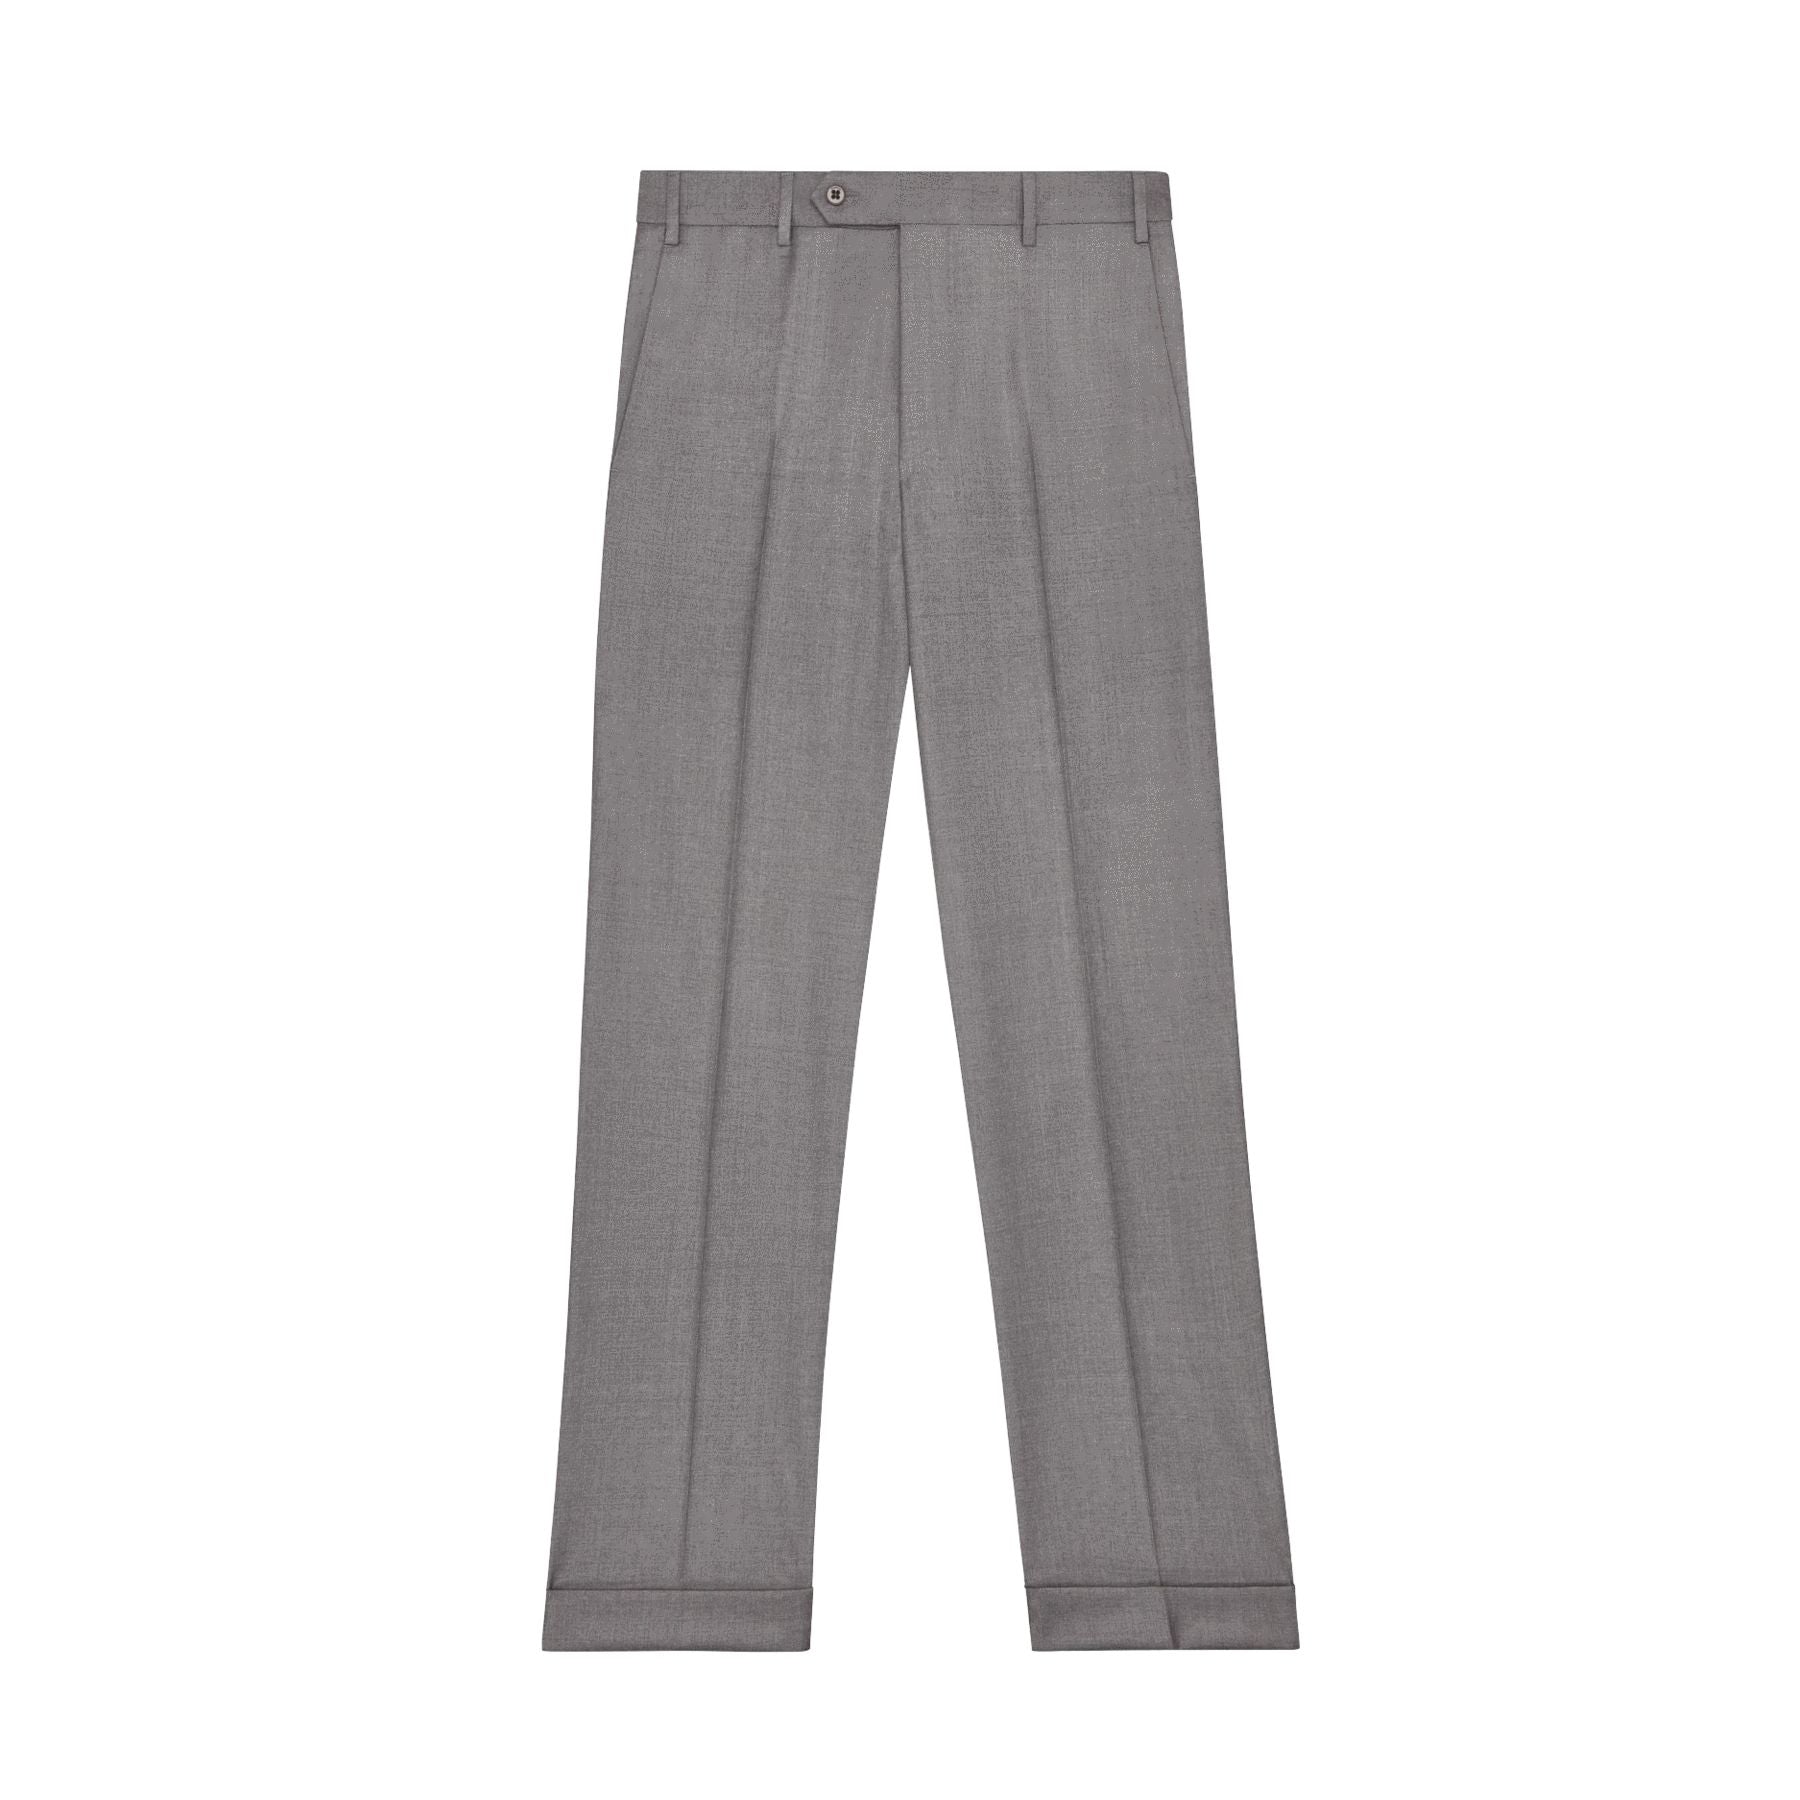 Todd Flat Front Super 120s Wool Serge Trouser in Light Grey (Full Fit) by Zanella